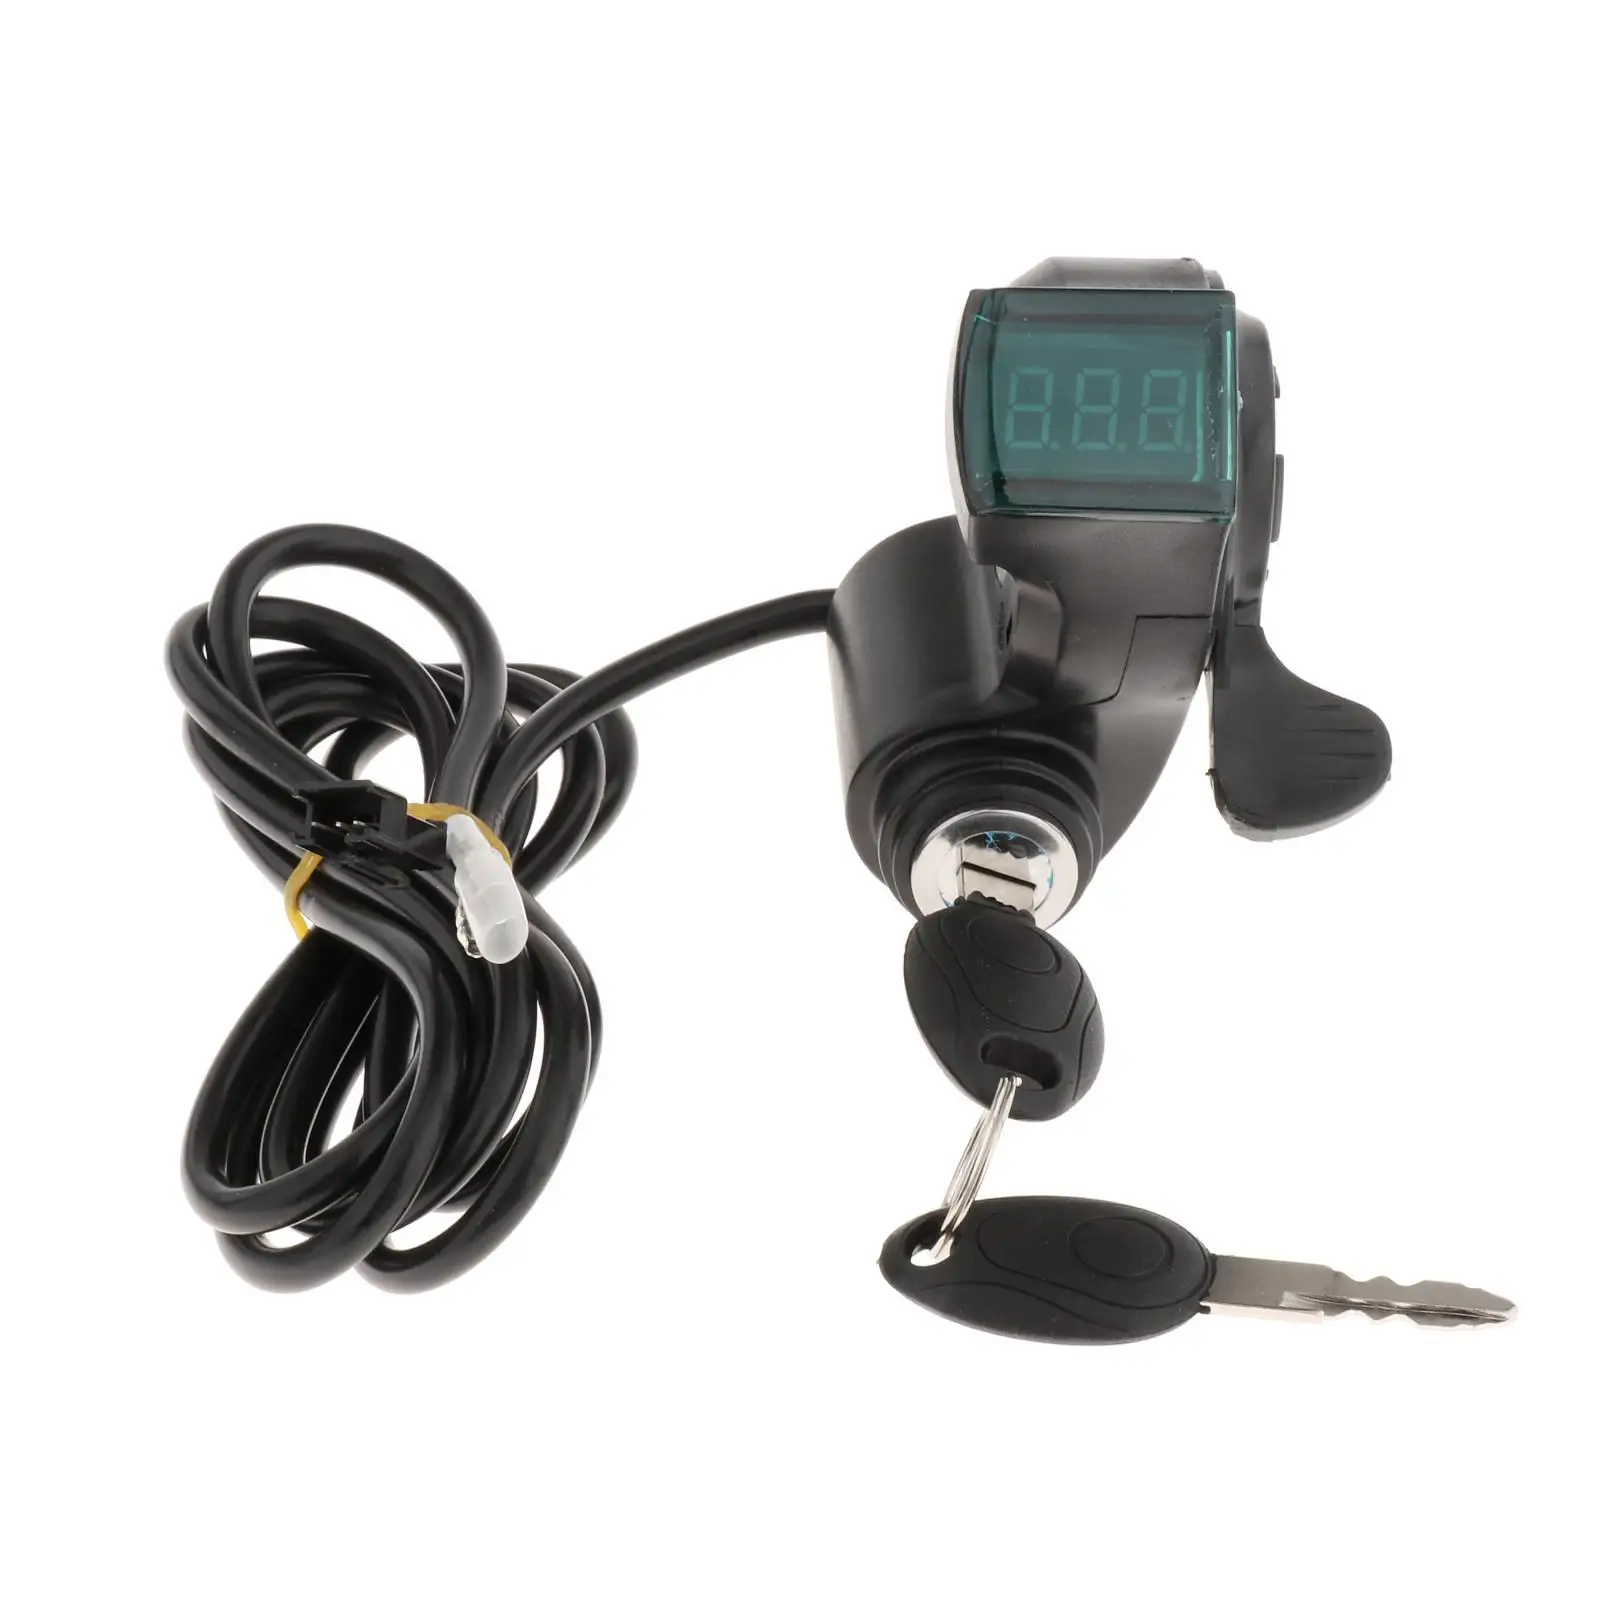  Bike Voltage Display   Scooter Electric Vehicle  Throttle Accessories